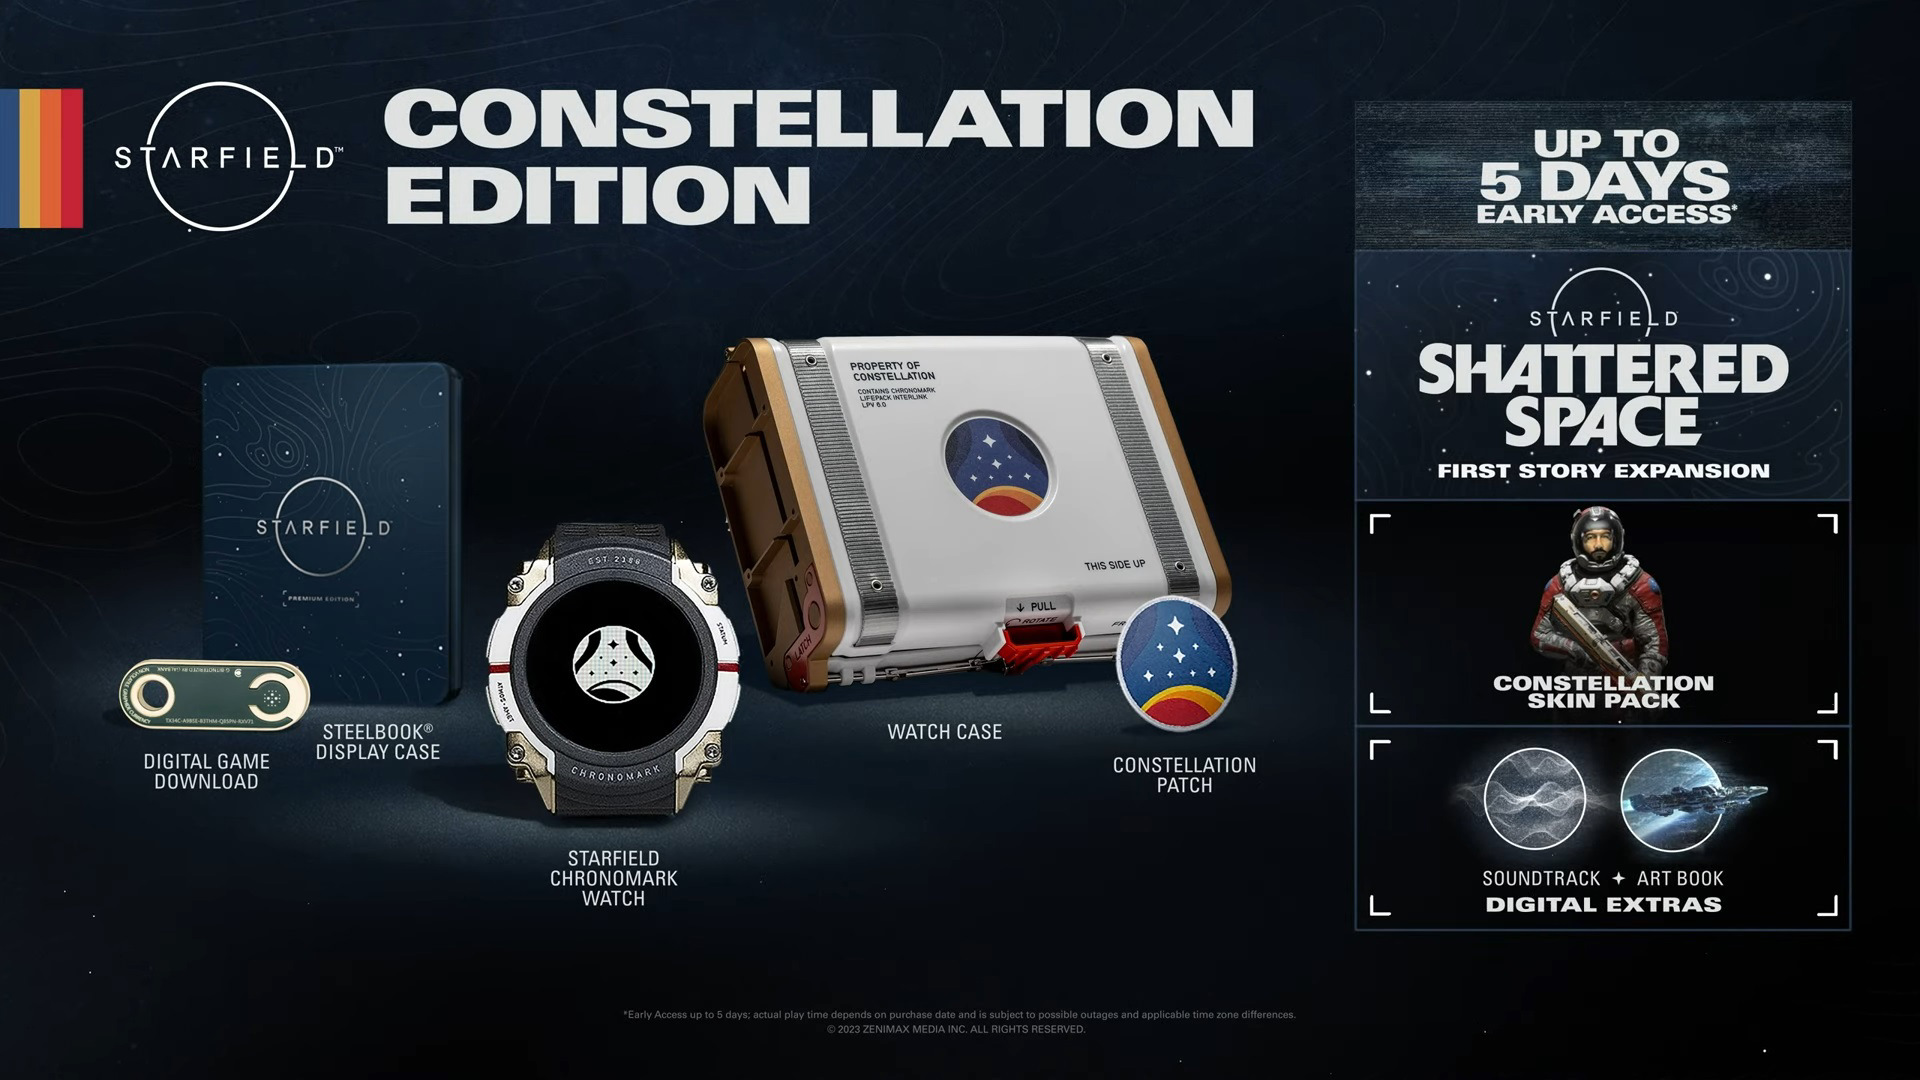 Starfield Constellation edition pre-orders are now live in the UK